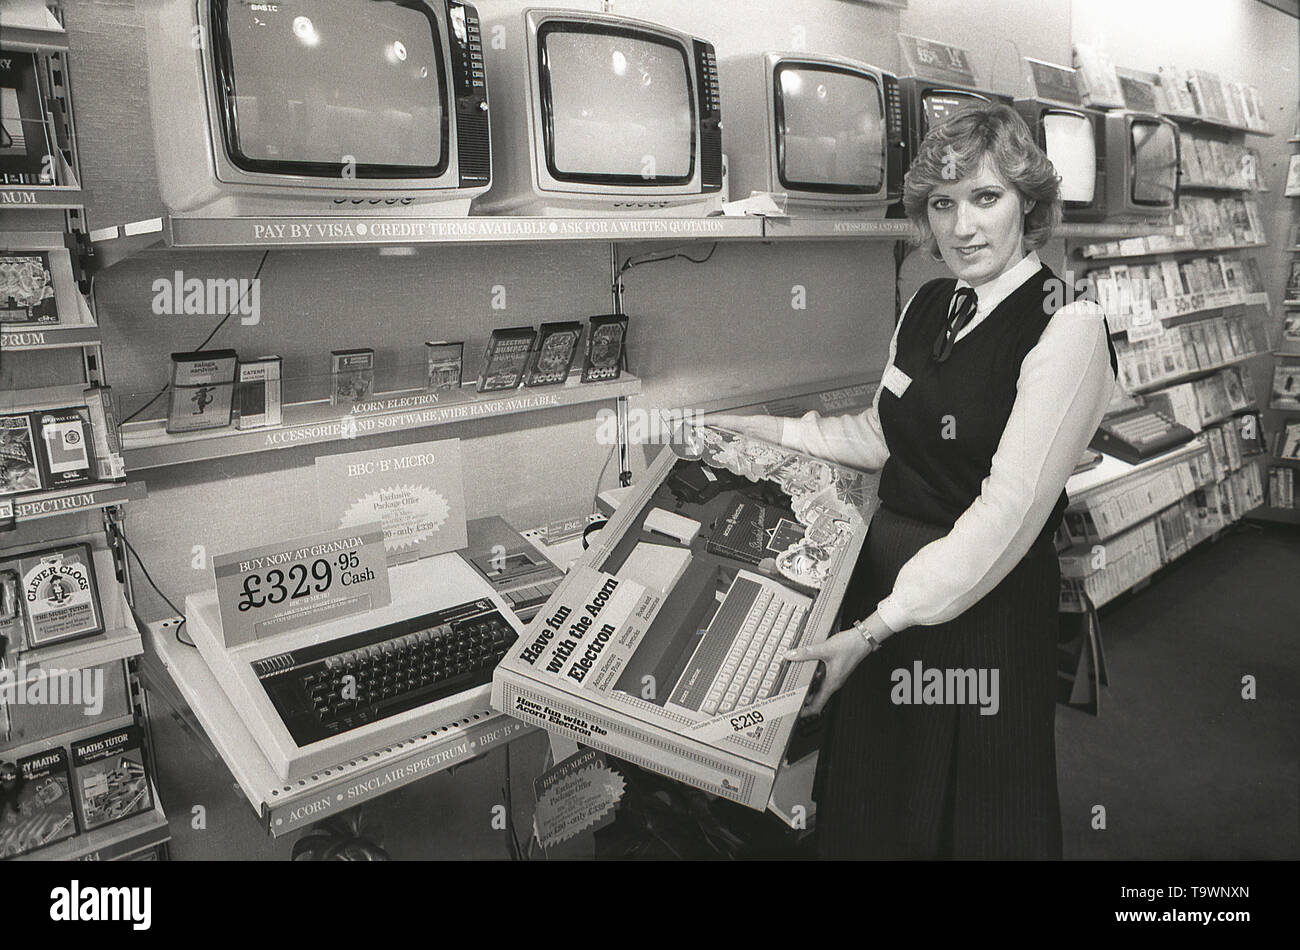 Inside Computer Stores of the 1970s and 1980s